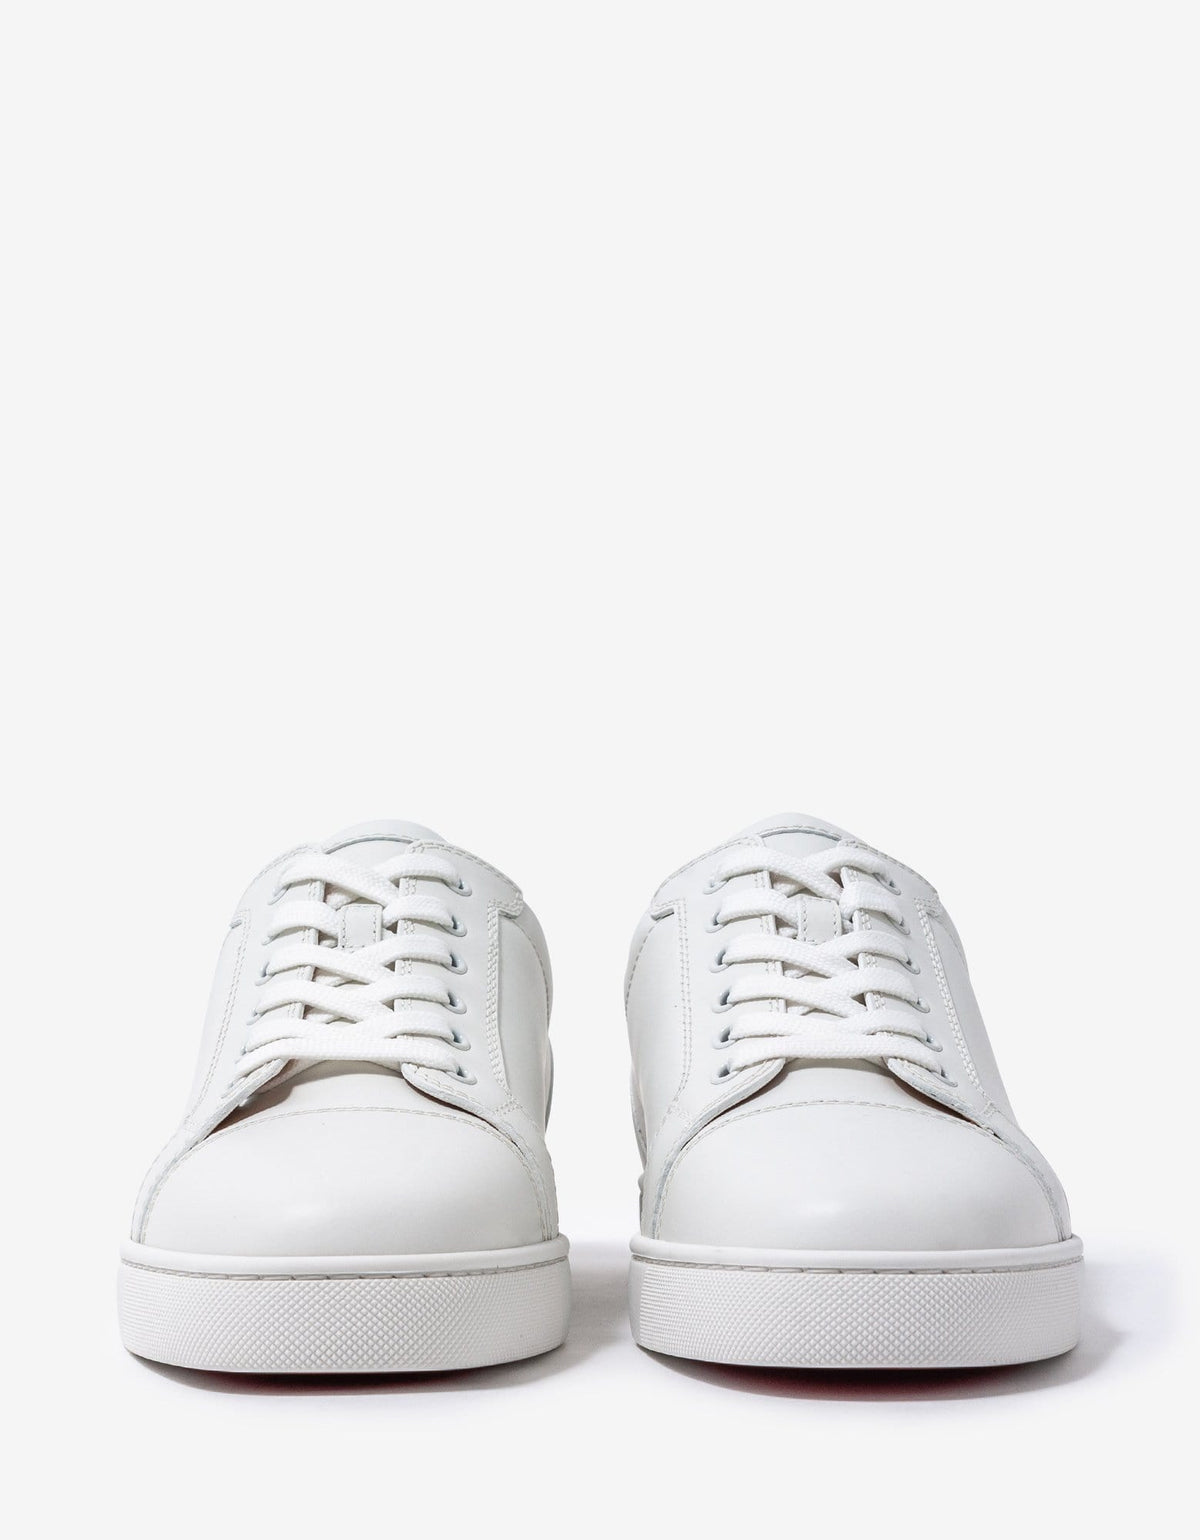 Christian Louboutin Louis Junior White Leather Trainers -